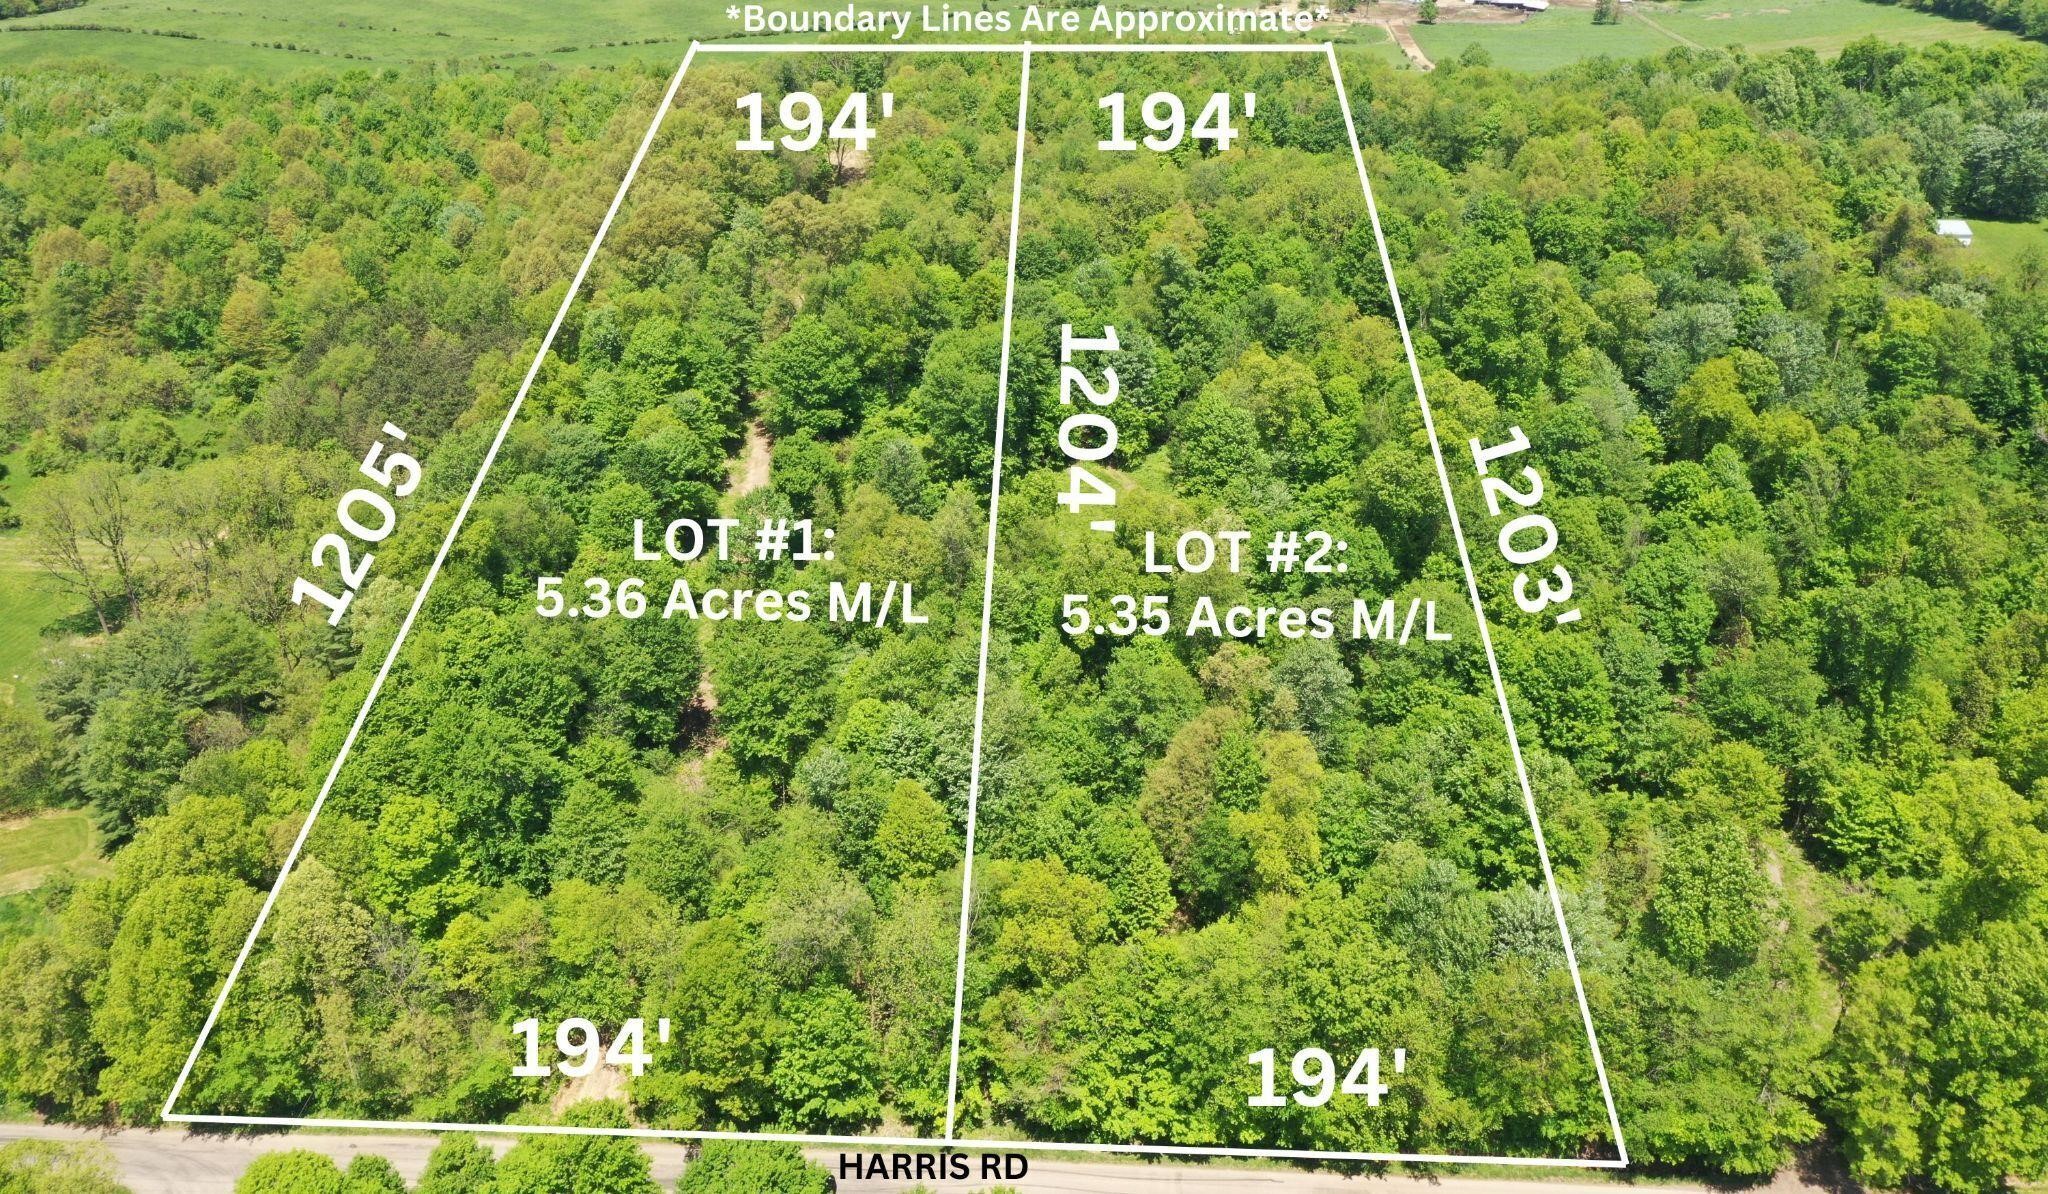 BUTLER-CLEAR FORK LAND AT AUCTION